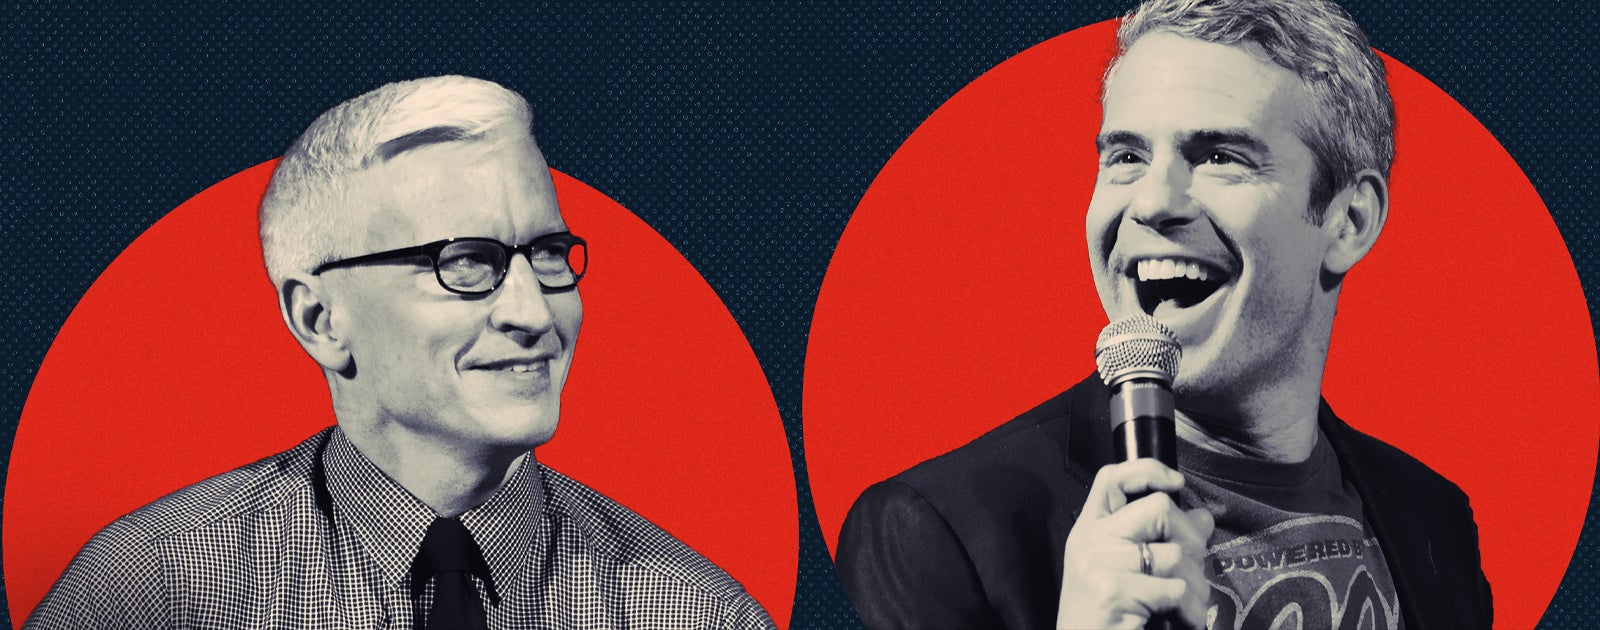 AC2: An Intimate Evening with Anderson Cooper & Andy Cohen